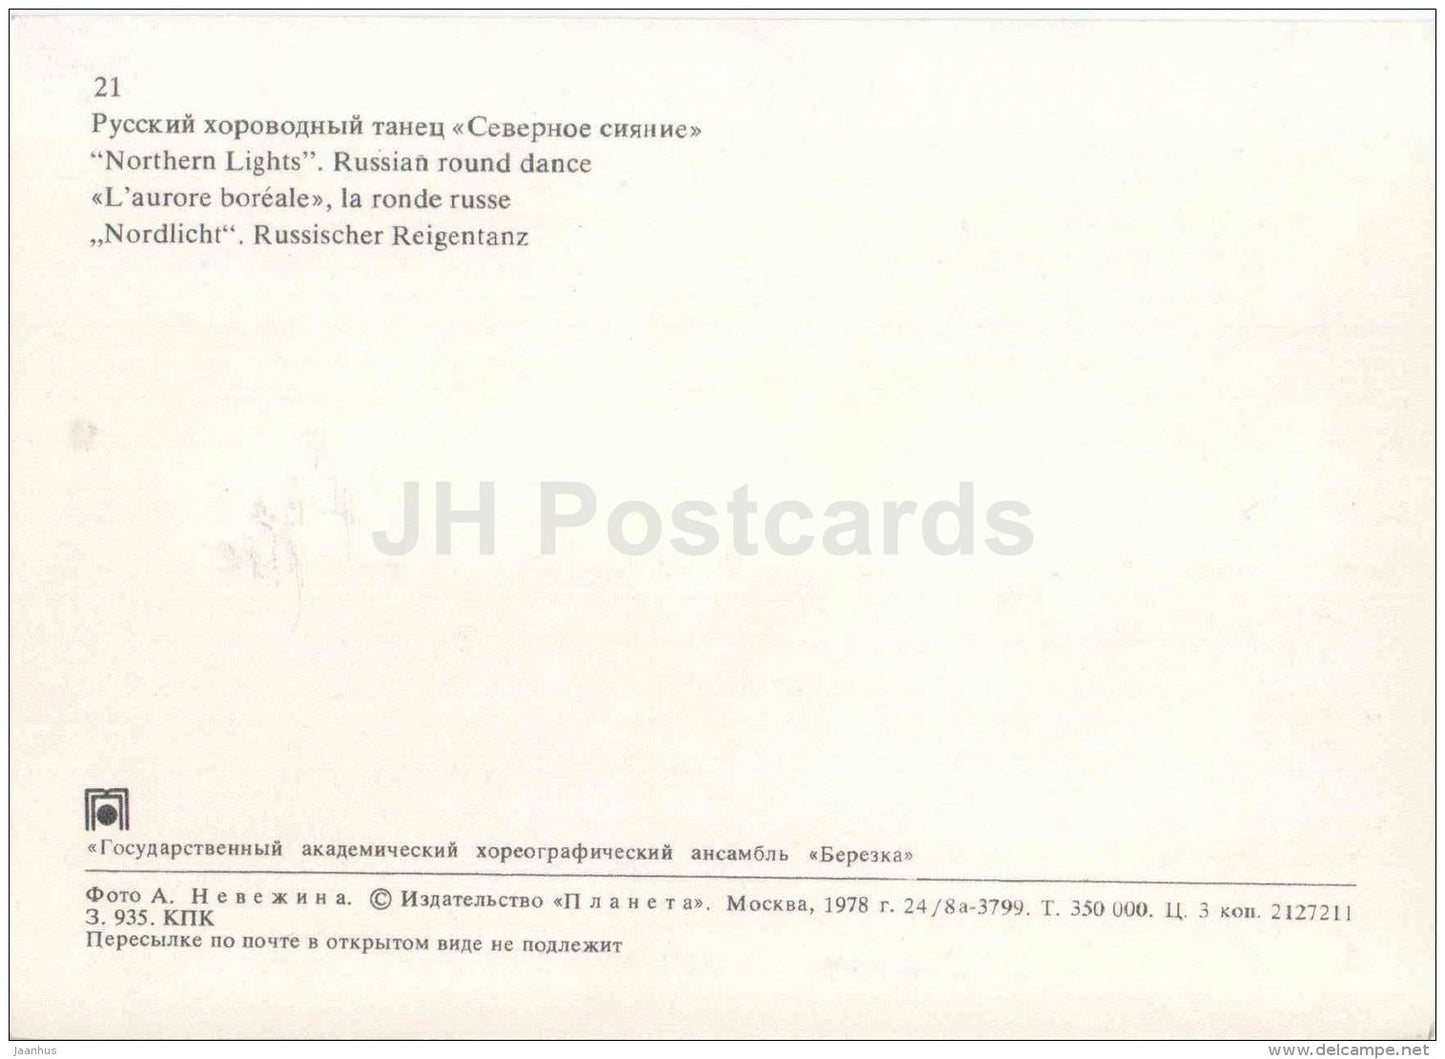 Northern Lights - Russian Round Dance - State Academic Choreographic Ensemble Berezka - Russia USSR - 1978 - unused - JH Postcards